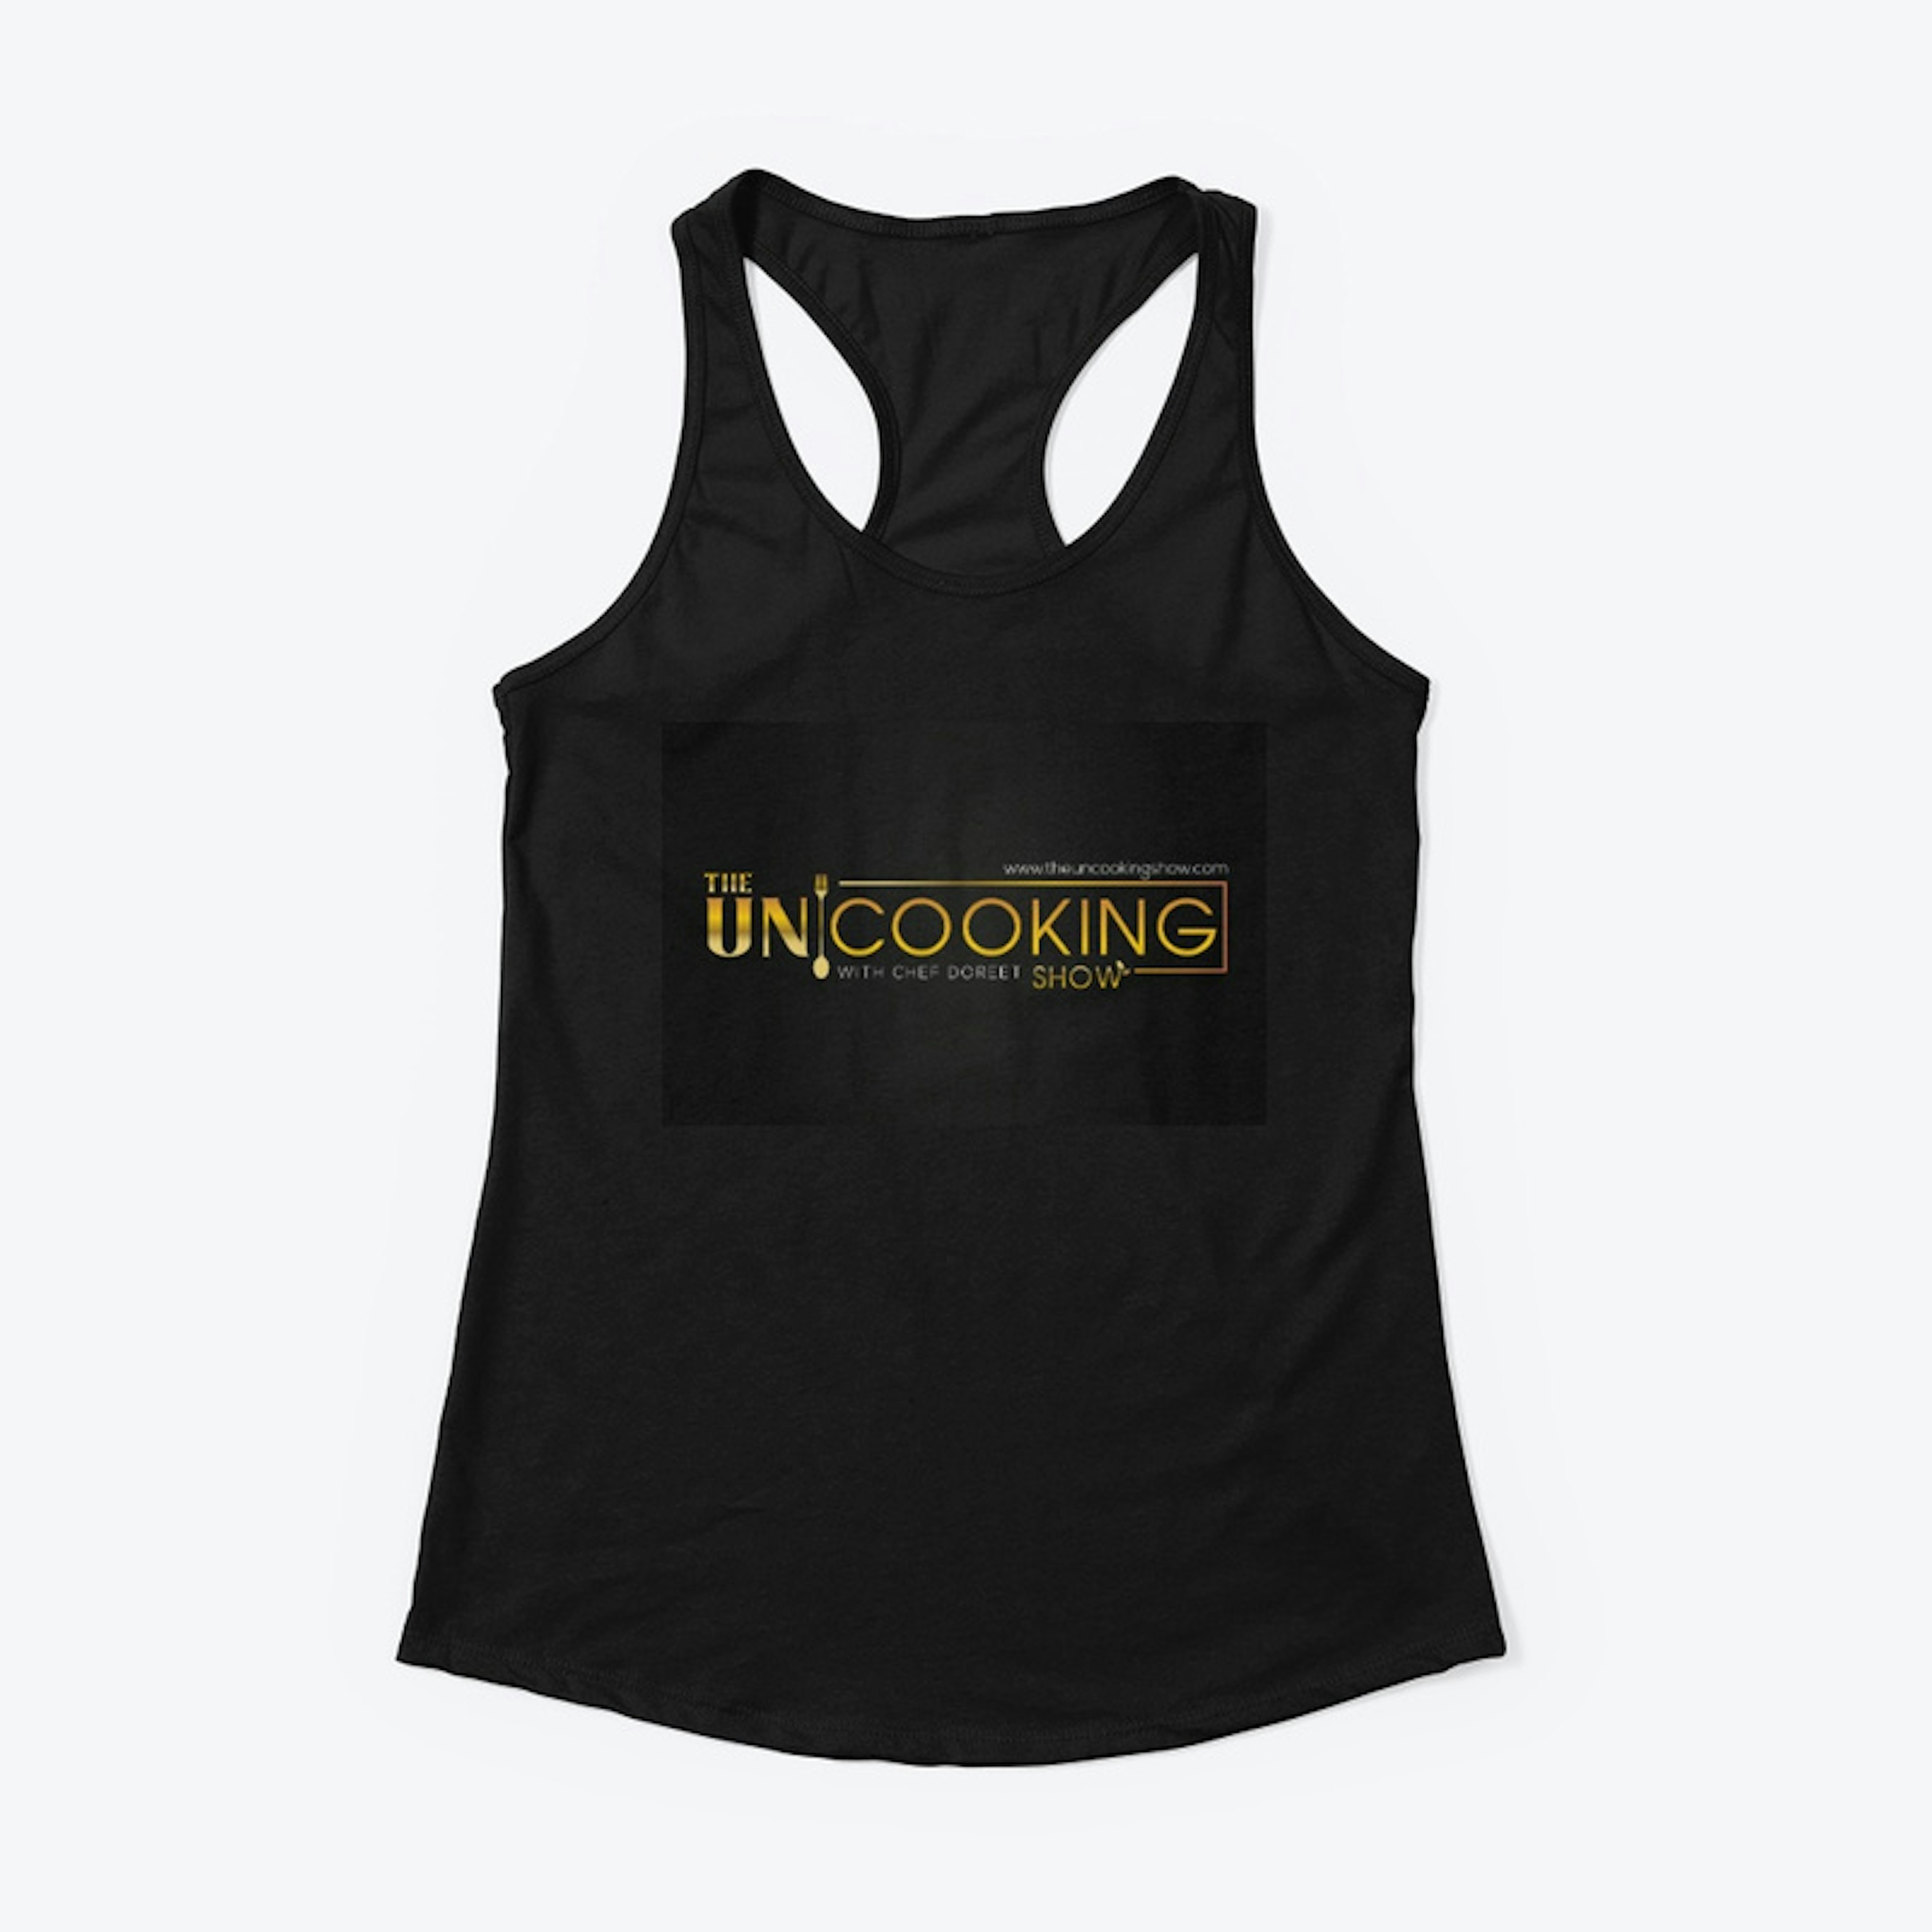 The UNcooking Show Apron